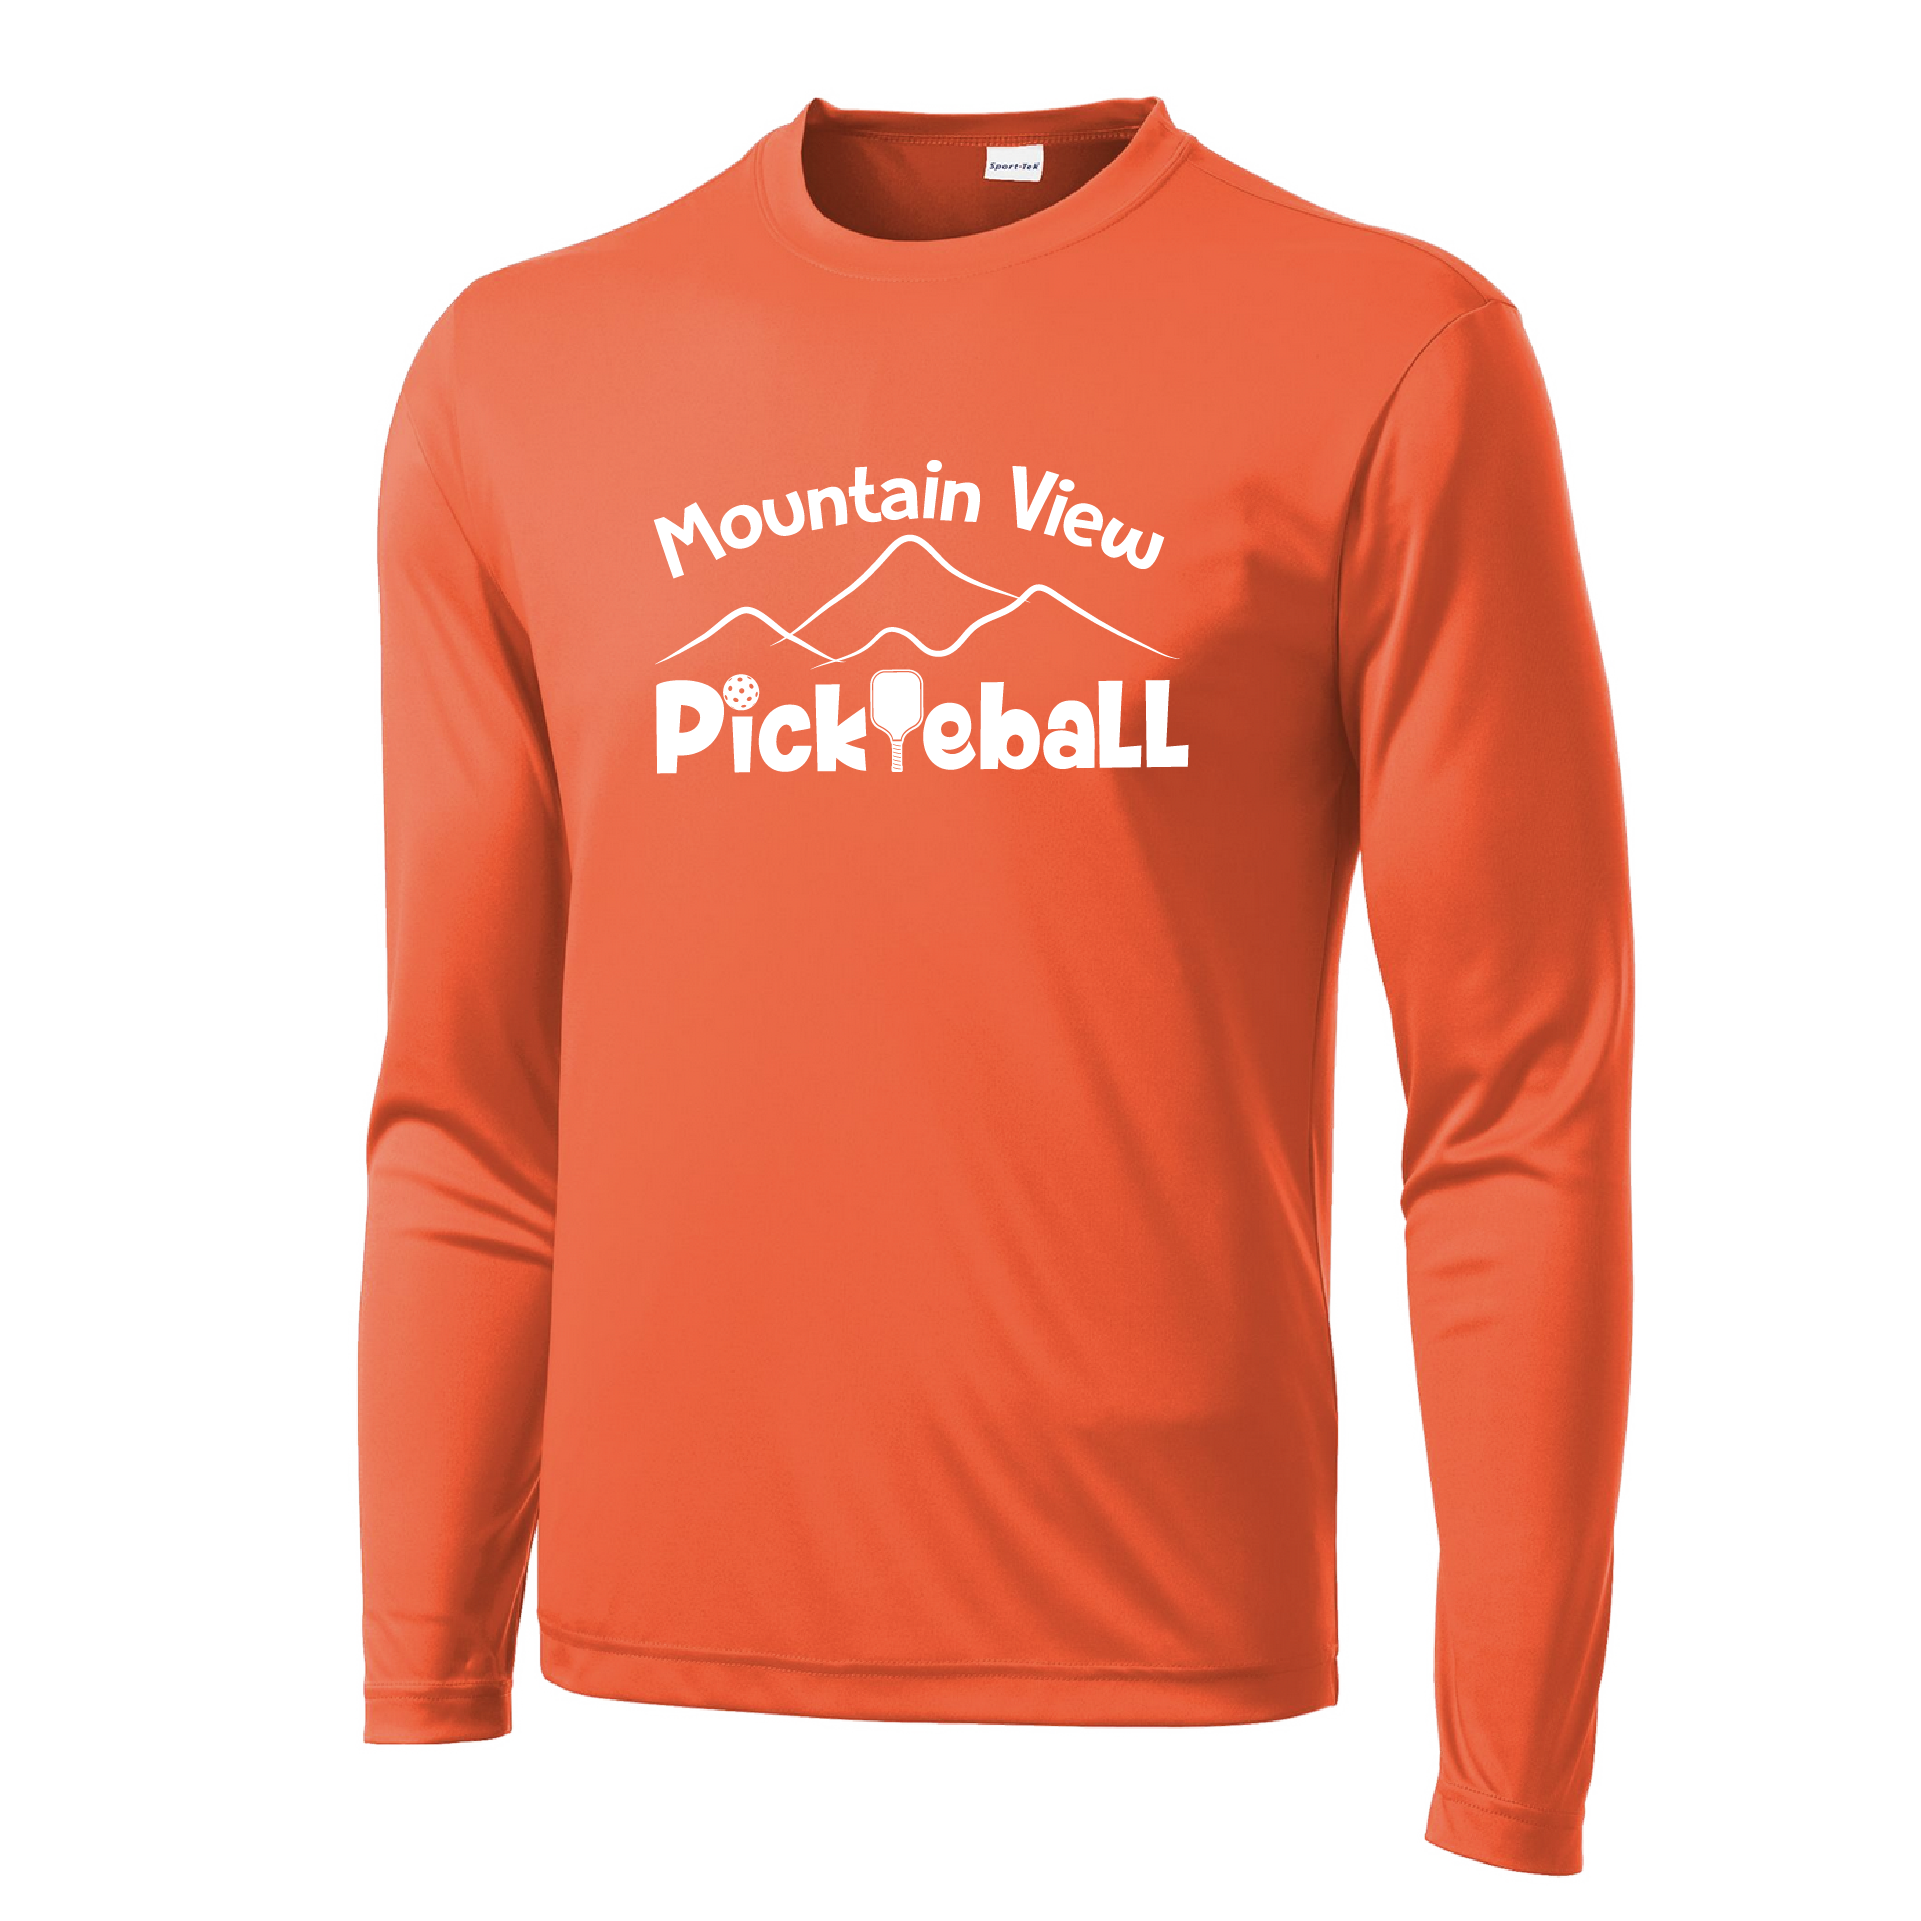 Pickleball Design: Mountain View Pickleball Club  Men's Styles: Long-Sleeve  Turn up the volume in this Men's shirt with its perfect mix of softness and attitude. Material is ultra-comfortable with moisture wicking properties and tri-blend softness. PosiCharge technology locks in color. Highly breathable and lightweight.